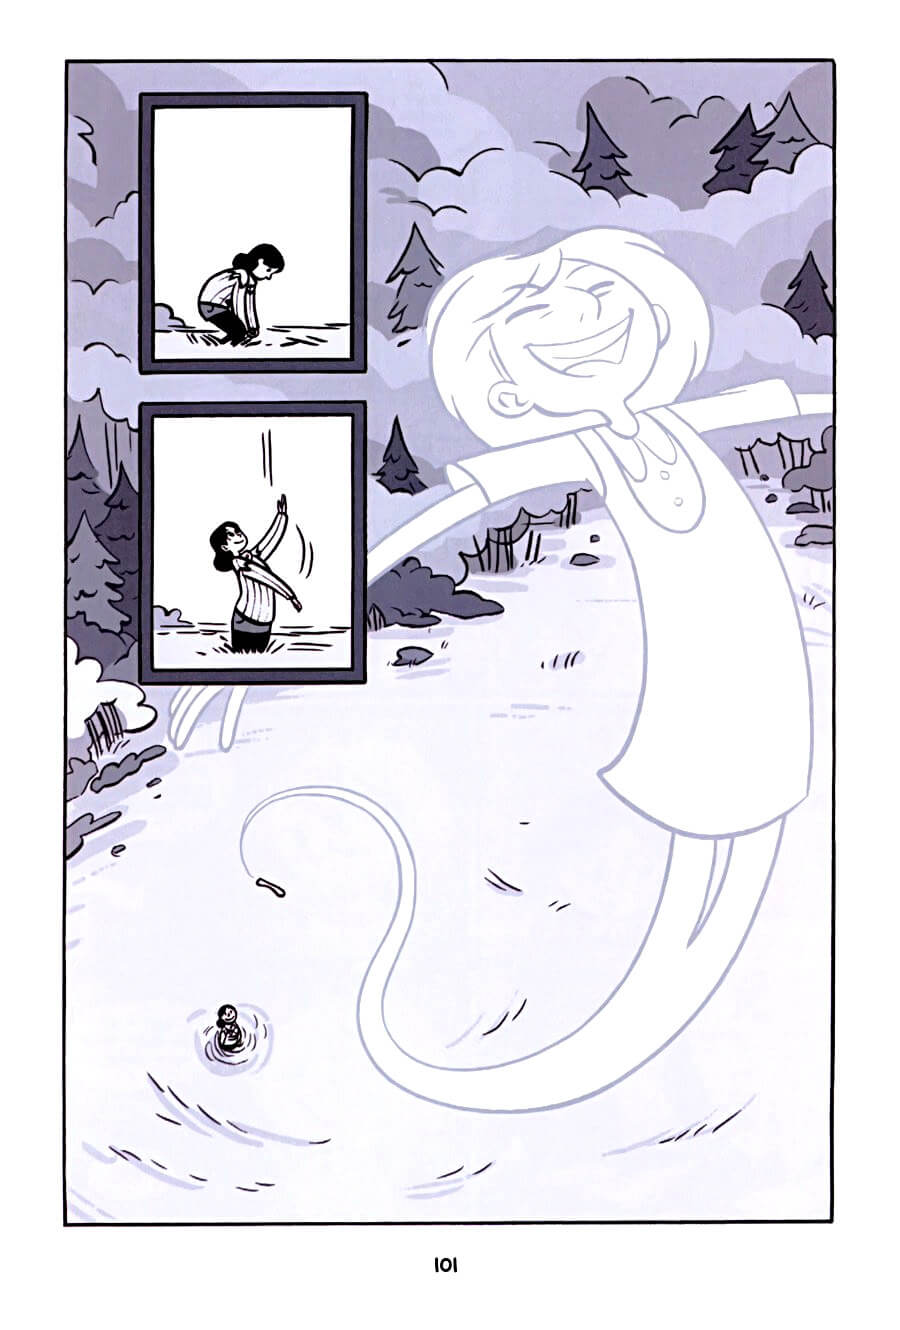 page 101 of anya's ghost graphic novel